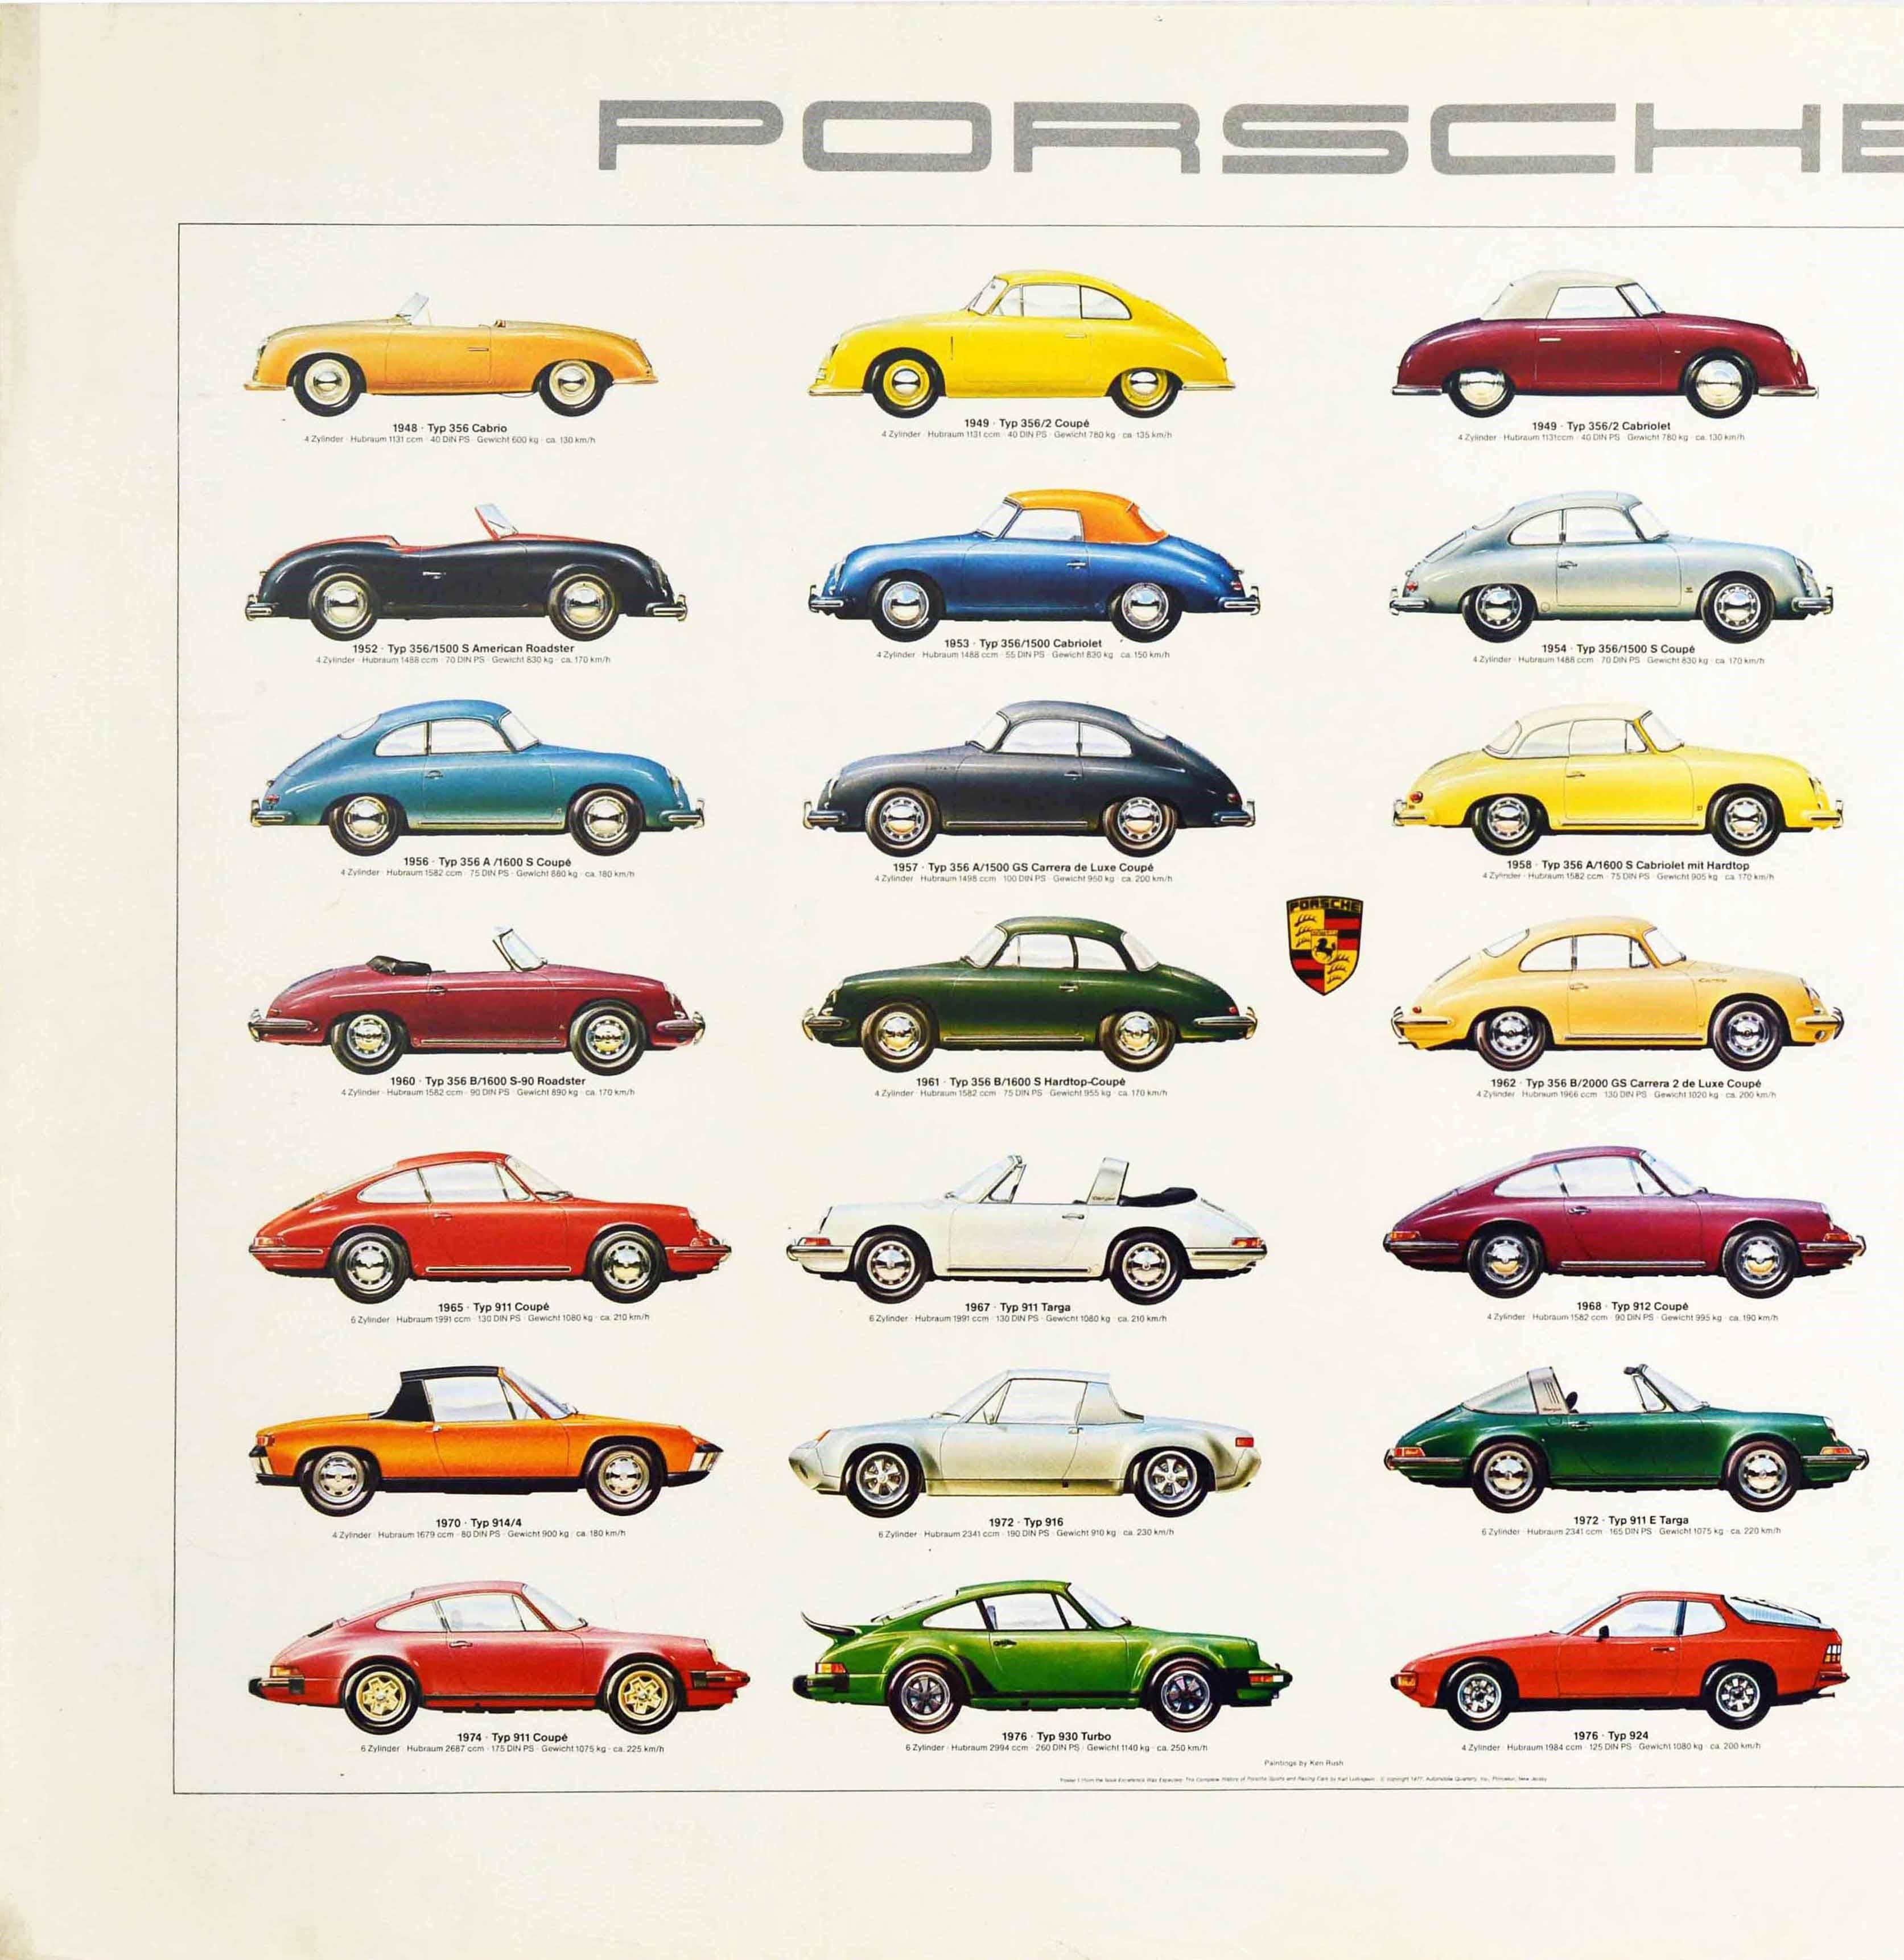 Original vintage advertising poster for Porsche car models depicting various cars including 356, 911, 912, 914, 916, 924, 928 and 930 models produced from the Typ 356 Cabrio released in 1948 to the Typ 928 released in 1977. Great artwork of these